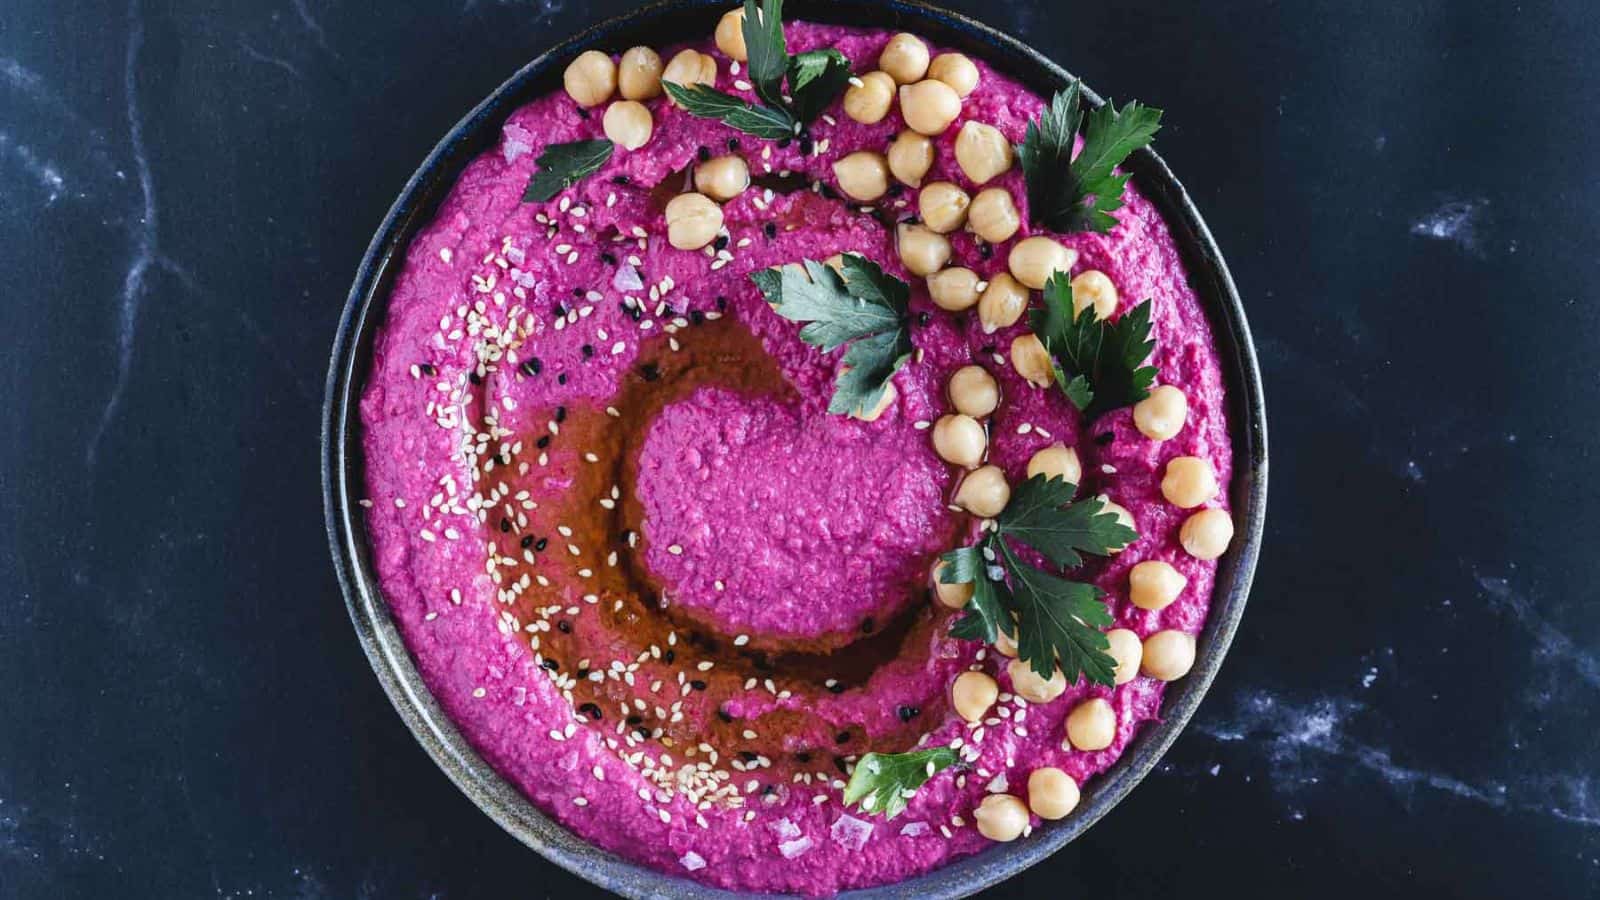 Overhead view of beet hummus with chickpeas and sesame seeds.